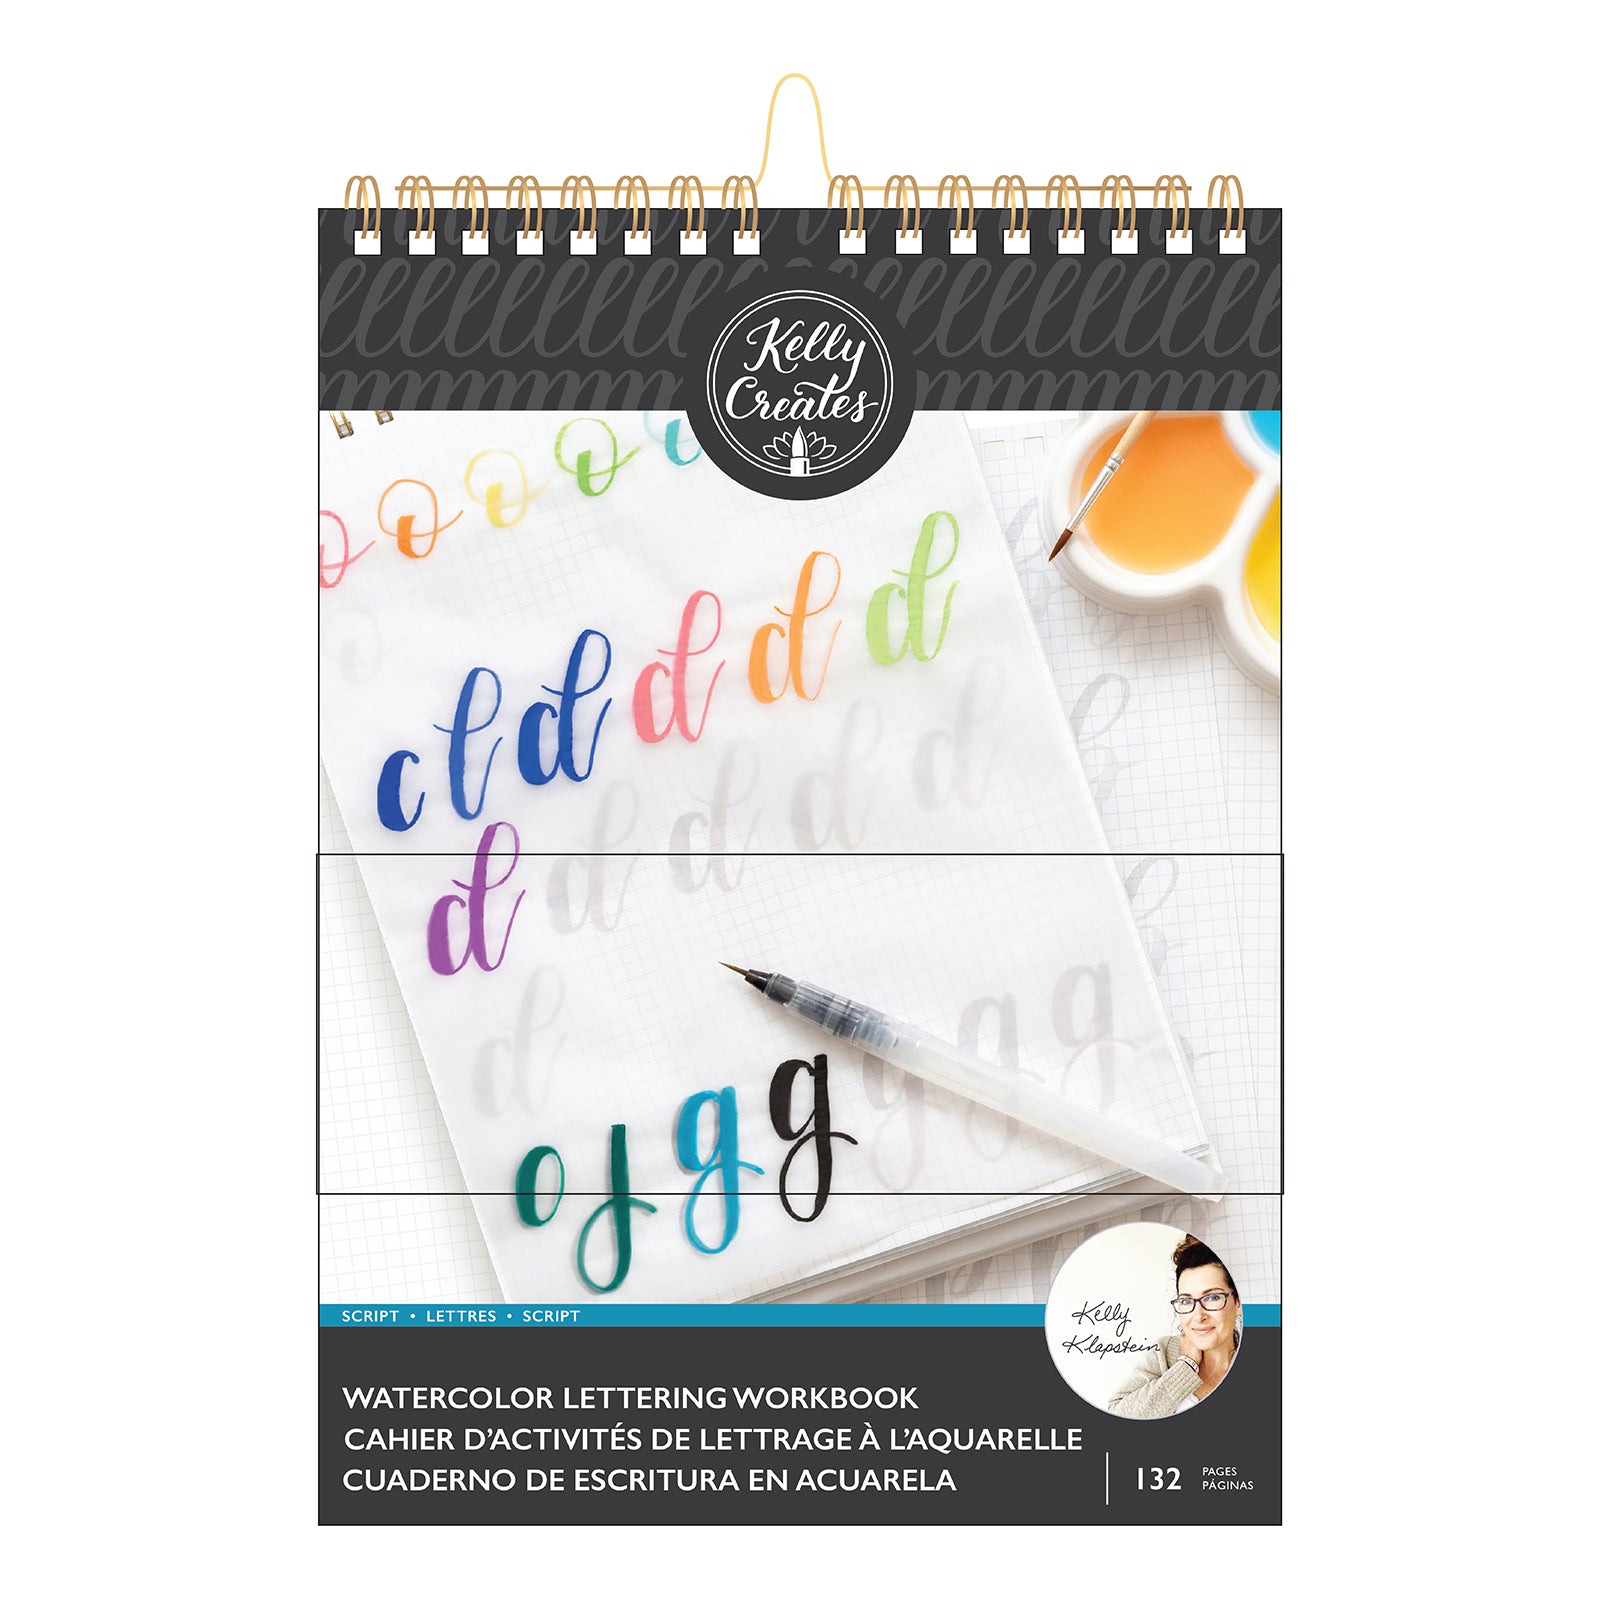 Kelly Creates Watercolor Lettering Workbook, Script Letters – The